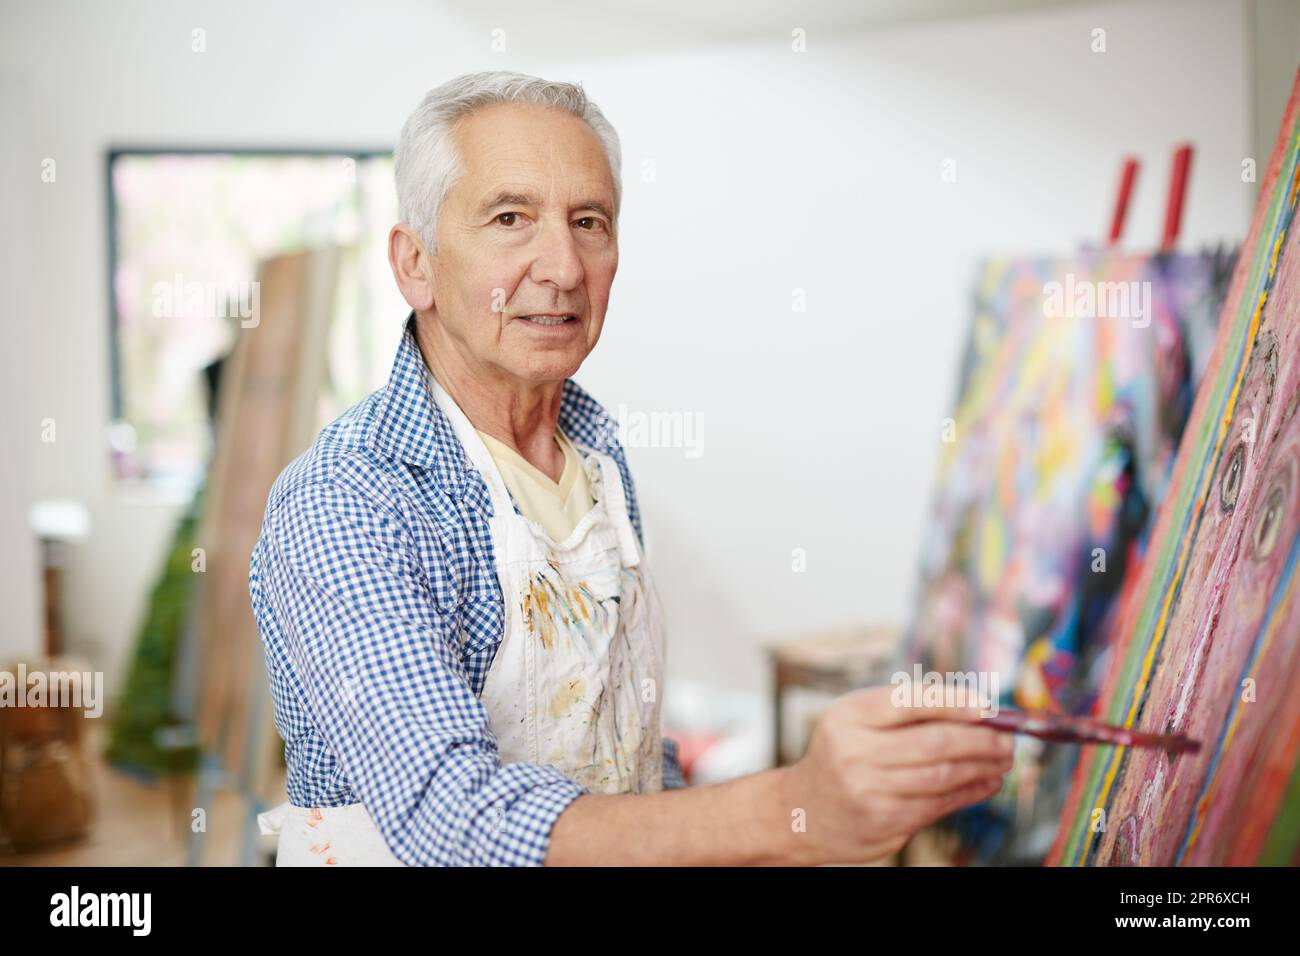 Life isnt about finding yourself, its about creating yourself. Shot of a senior man working on a painting at home. Stock Photo